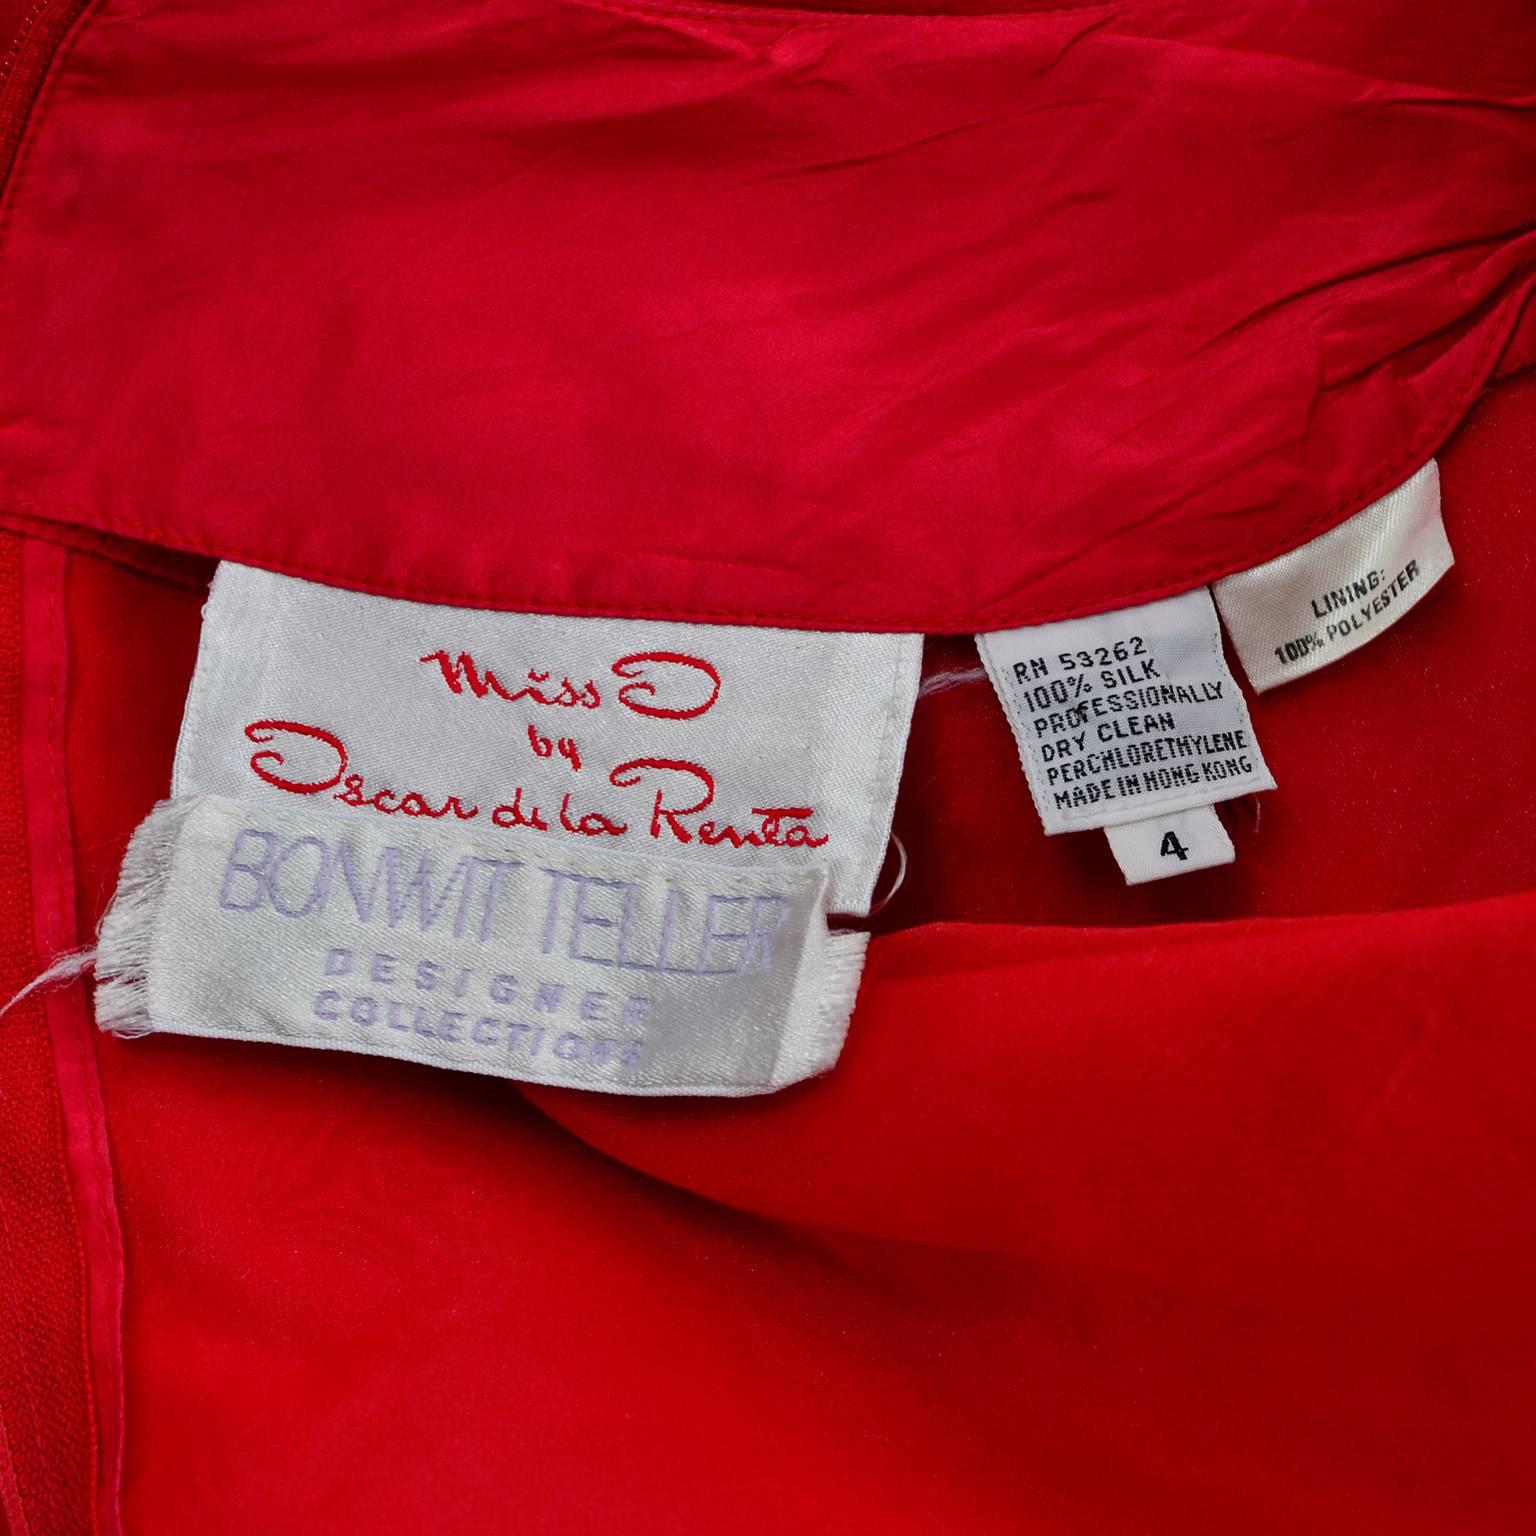 Oscar de la Renta Vintage Red Silk Party Dress from Bonwit Teller in Size 4/6 In Excellent Condition For Sale In Portland, OR